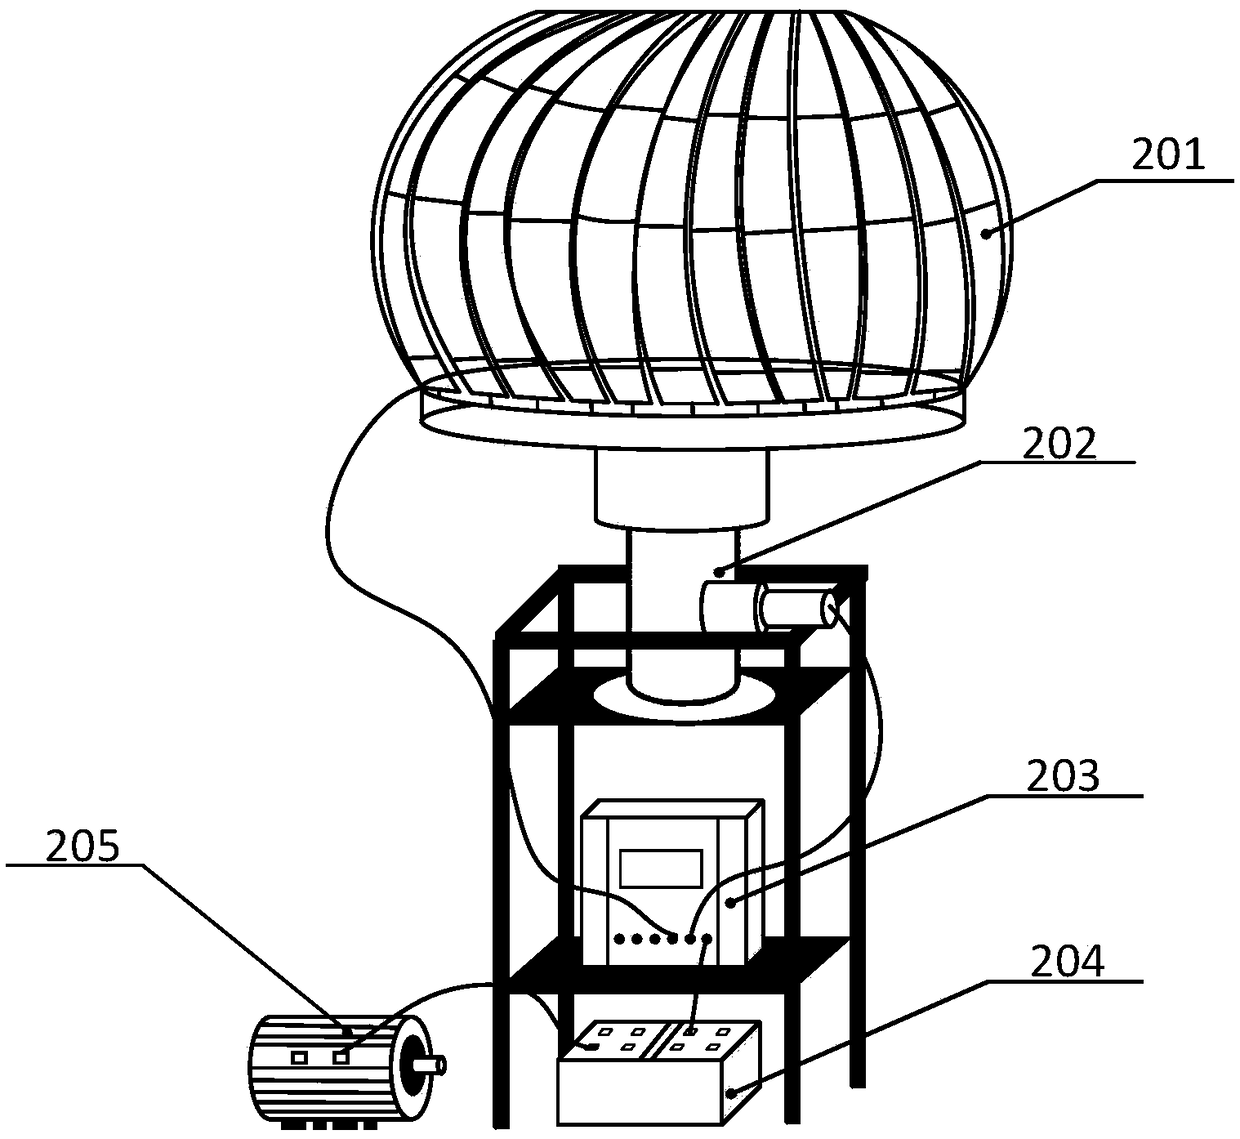 A spherical integrated wind-photovoltaic complementary power generation system and method